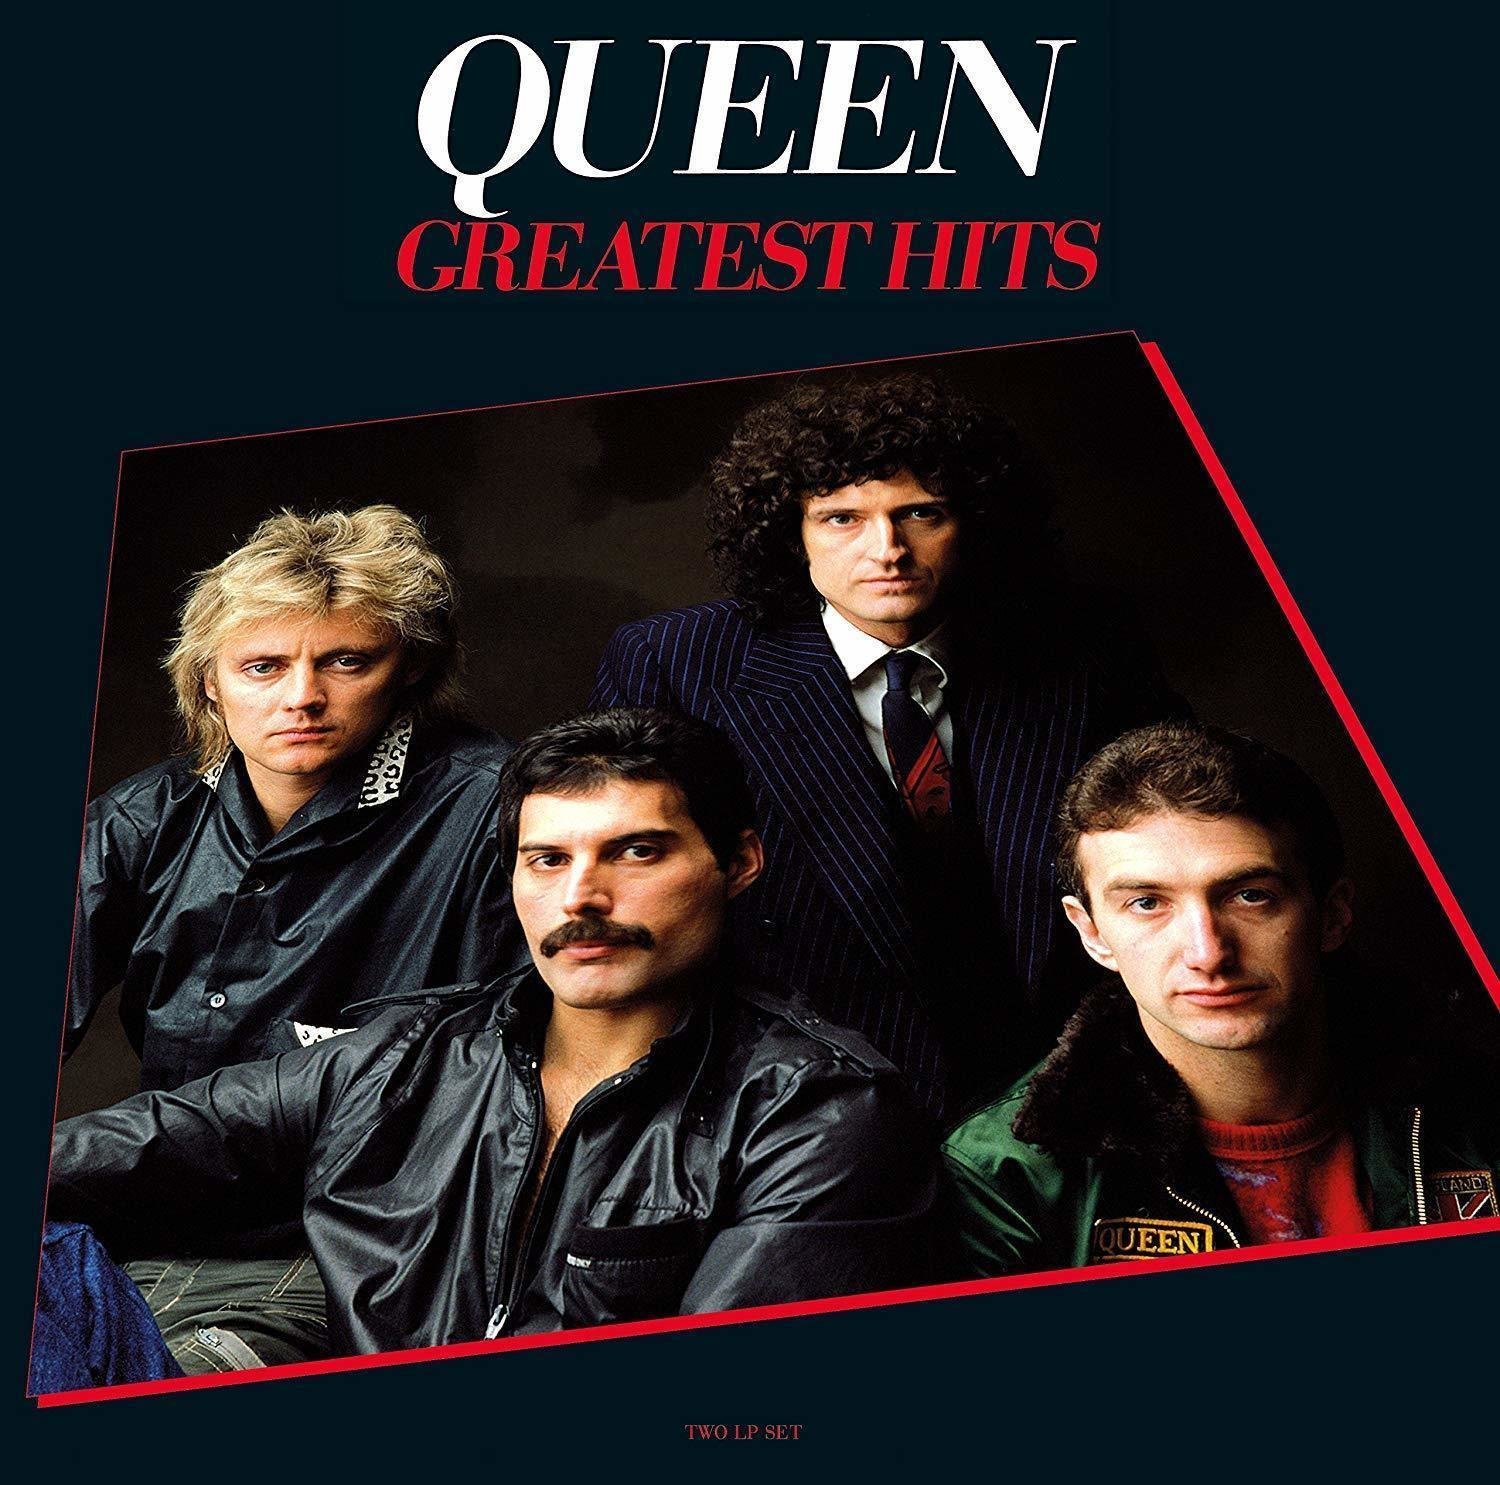 Vinyl Record Queen - Greatest Hits 1 (Remastered) (2 LP)